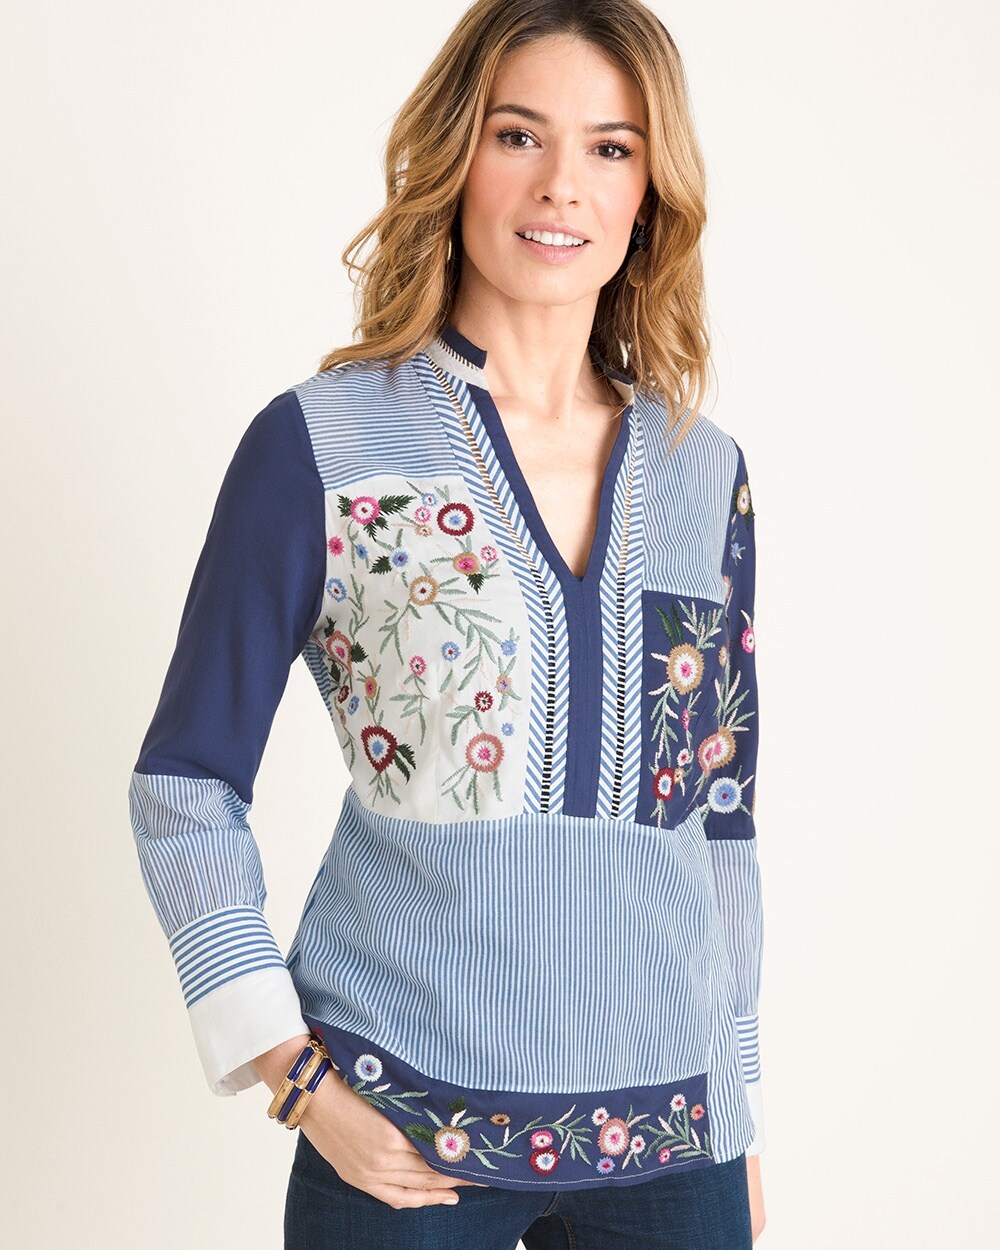 Patchwork Embroidery Top - Chico's